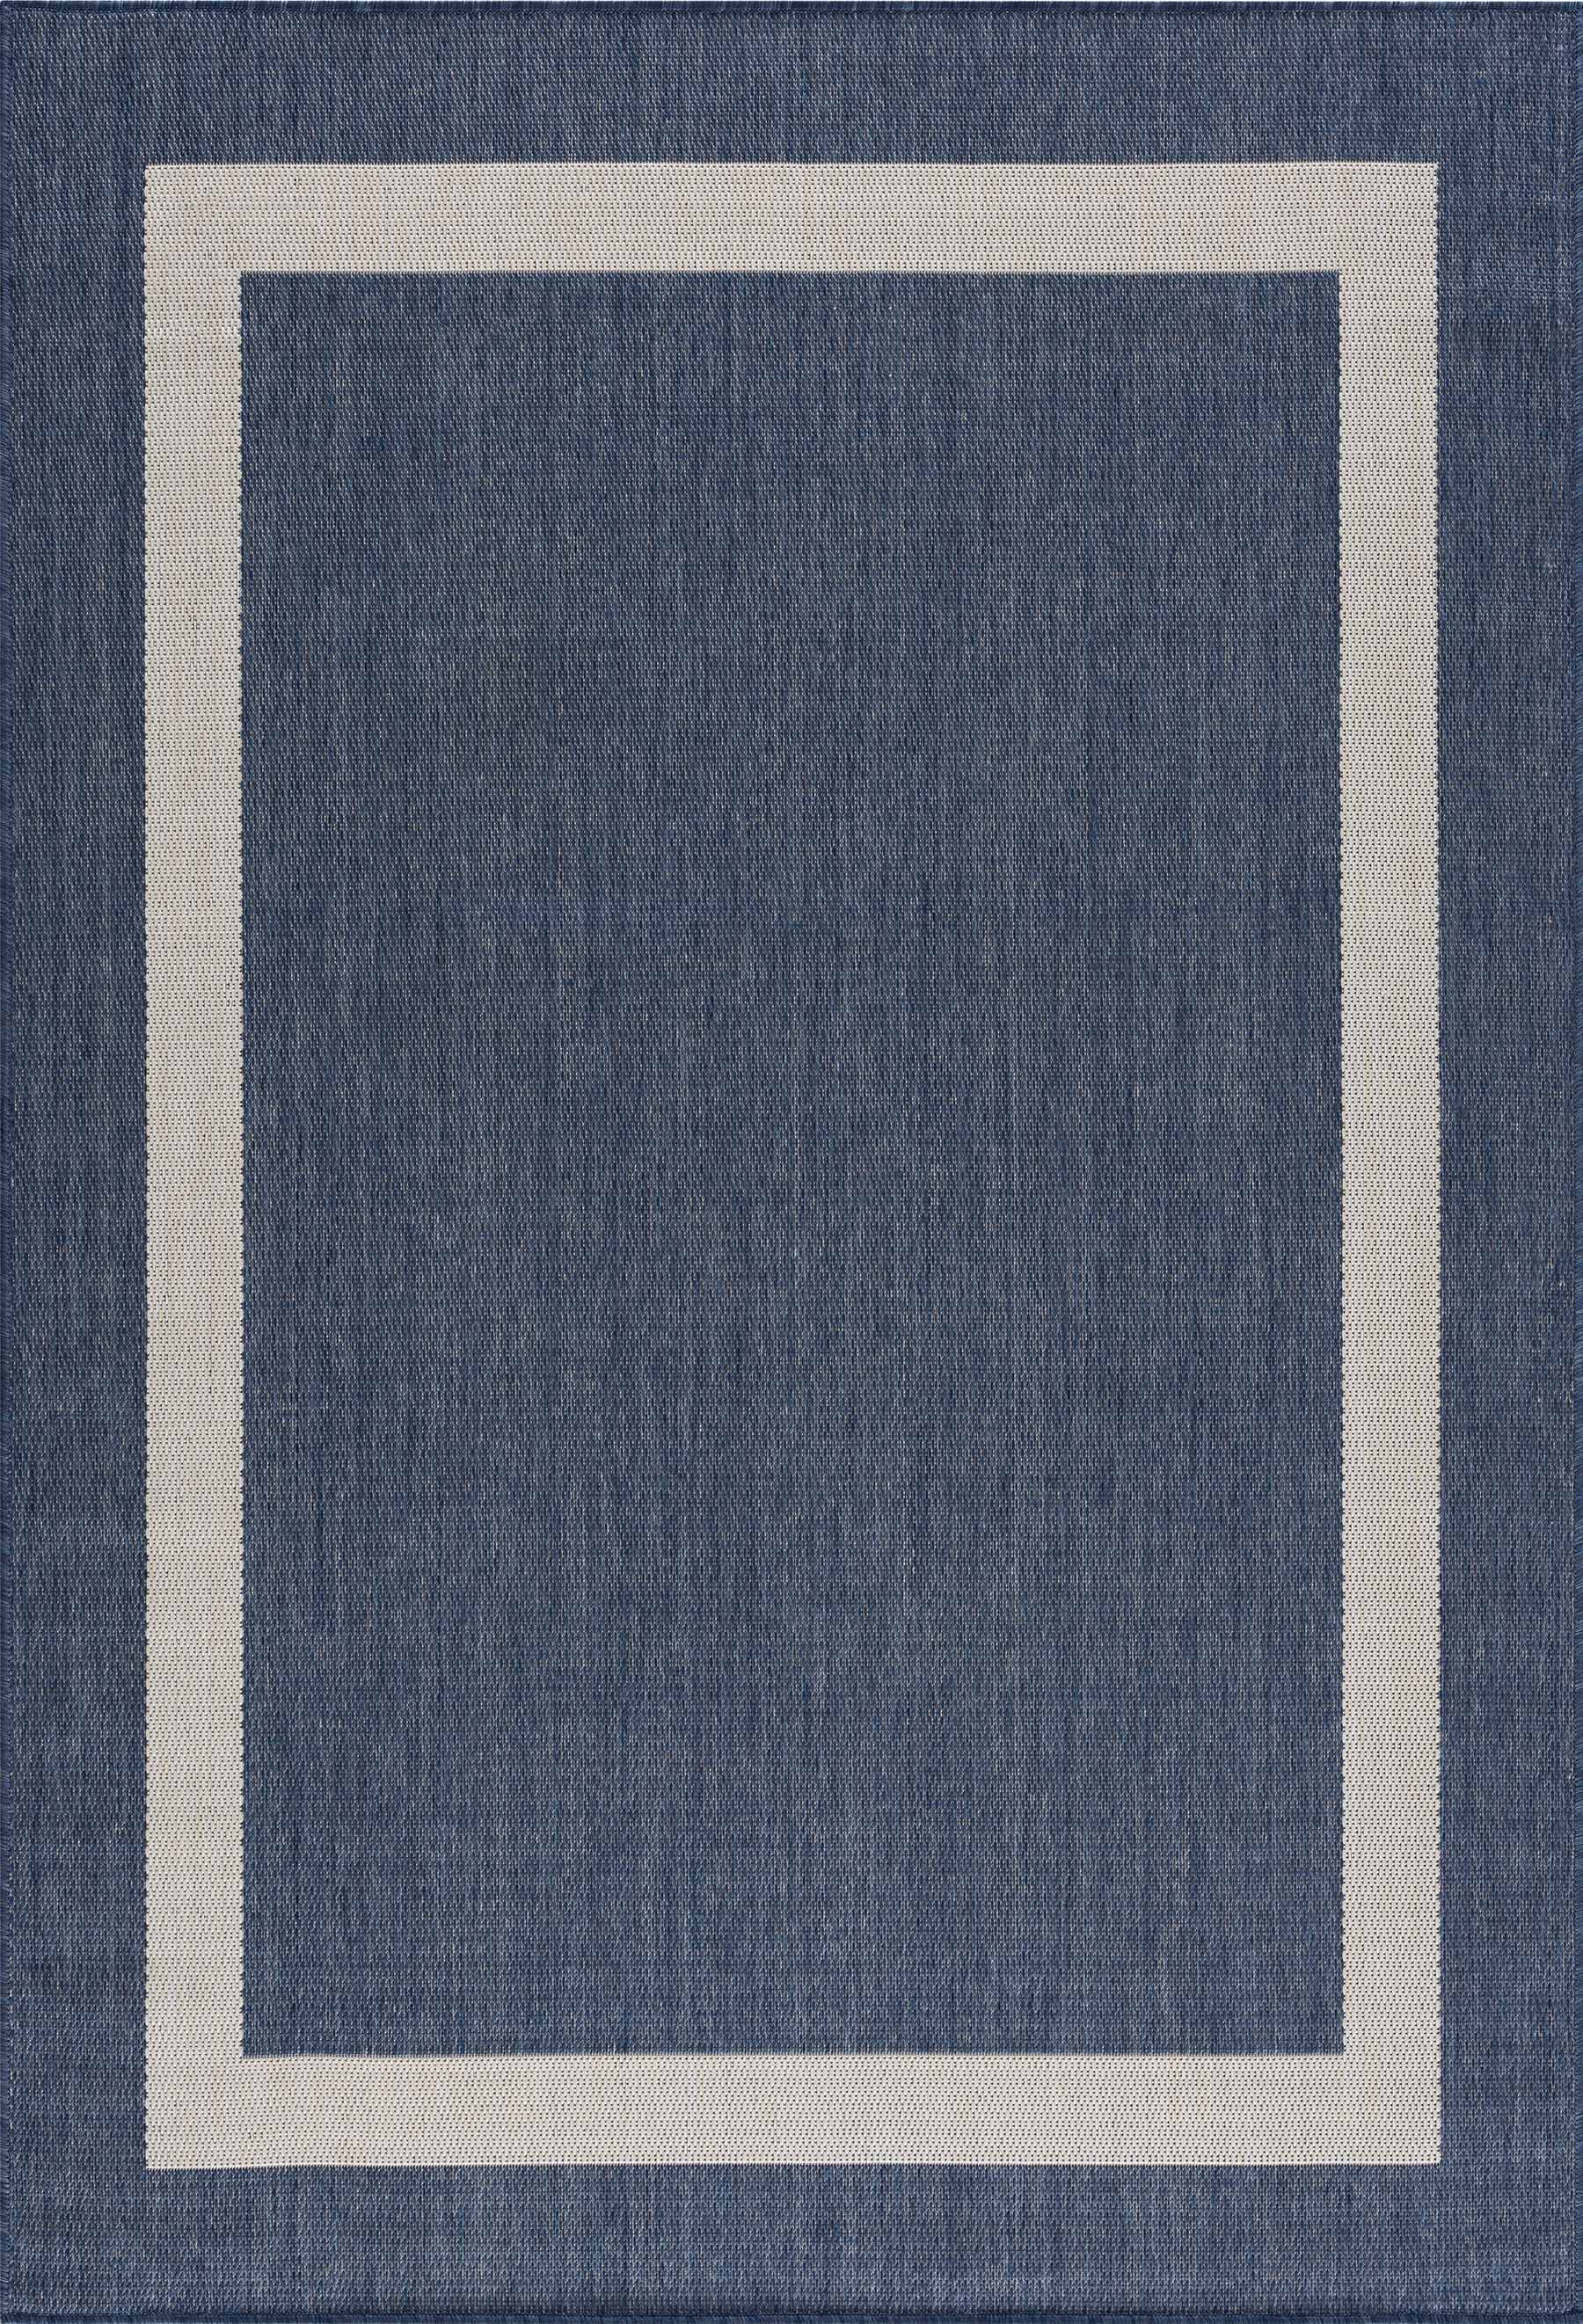 Bordered Outdoor Rugs Blue